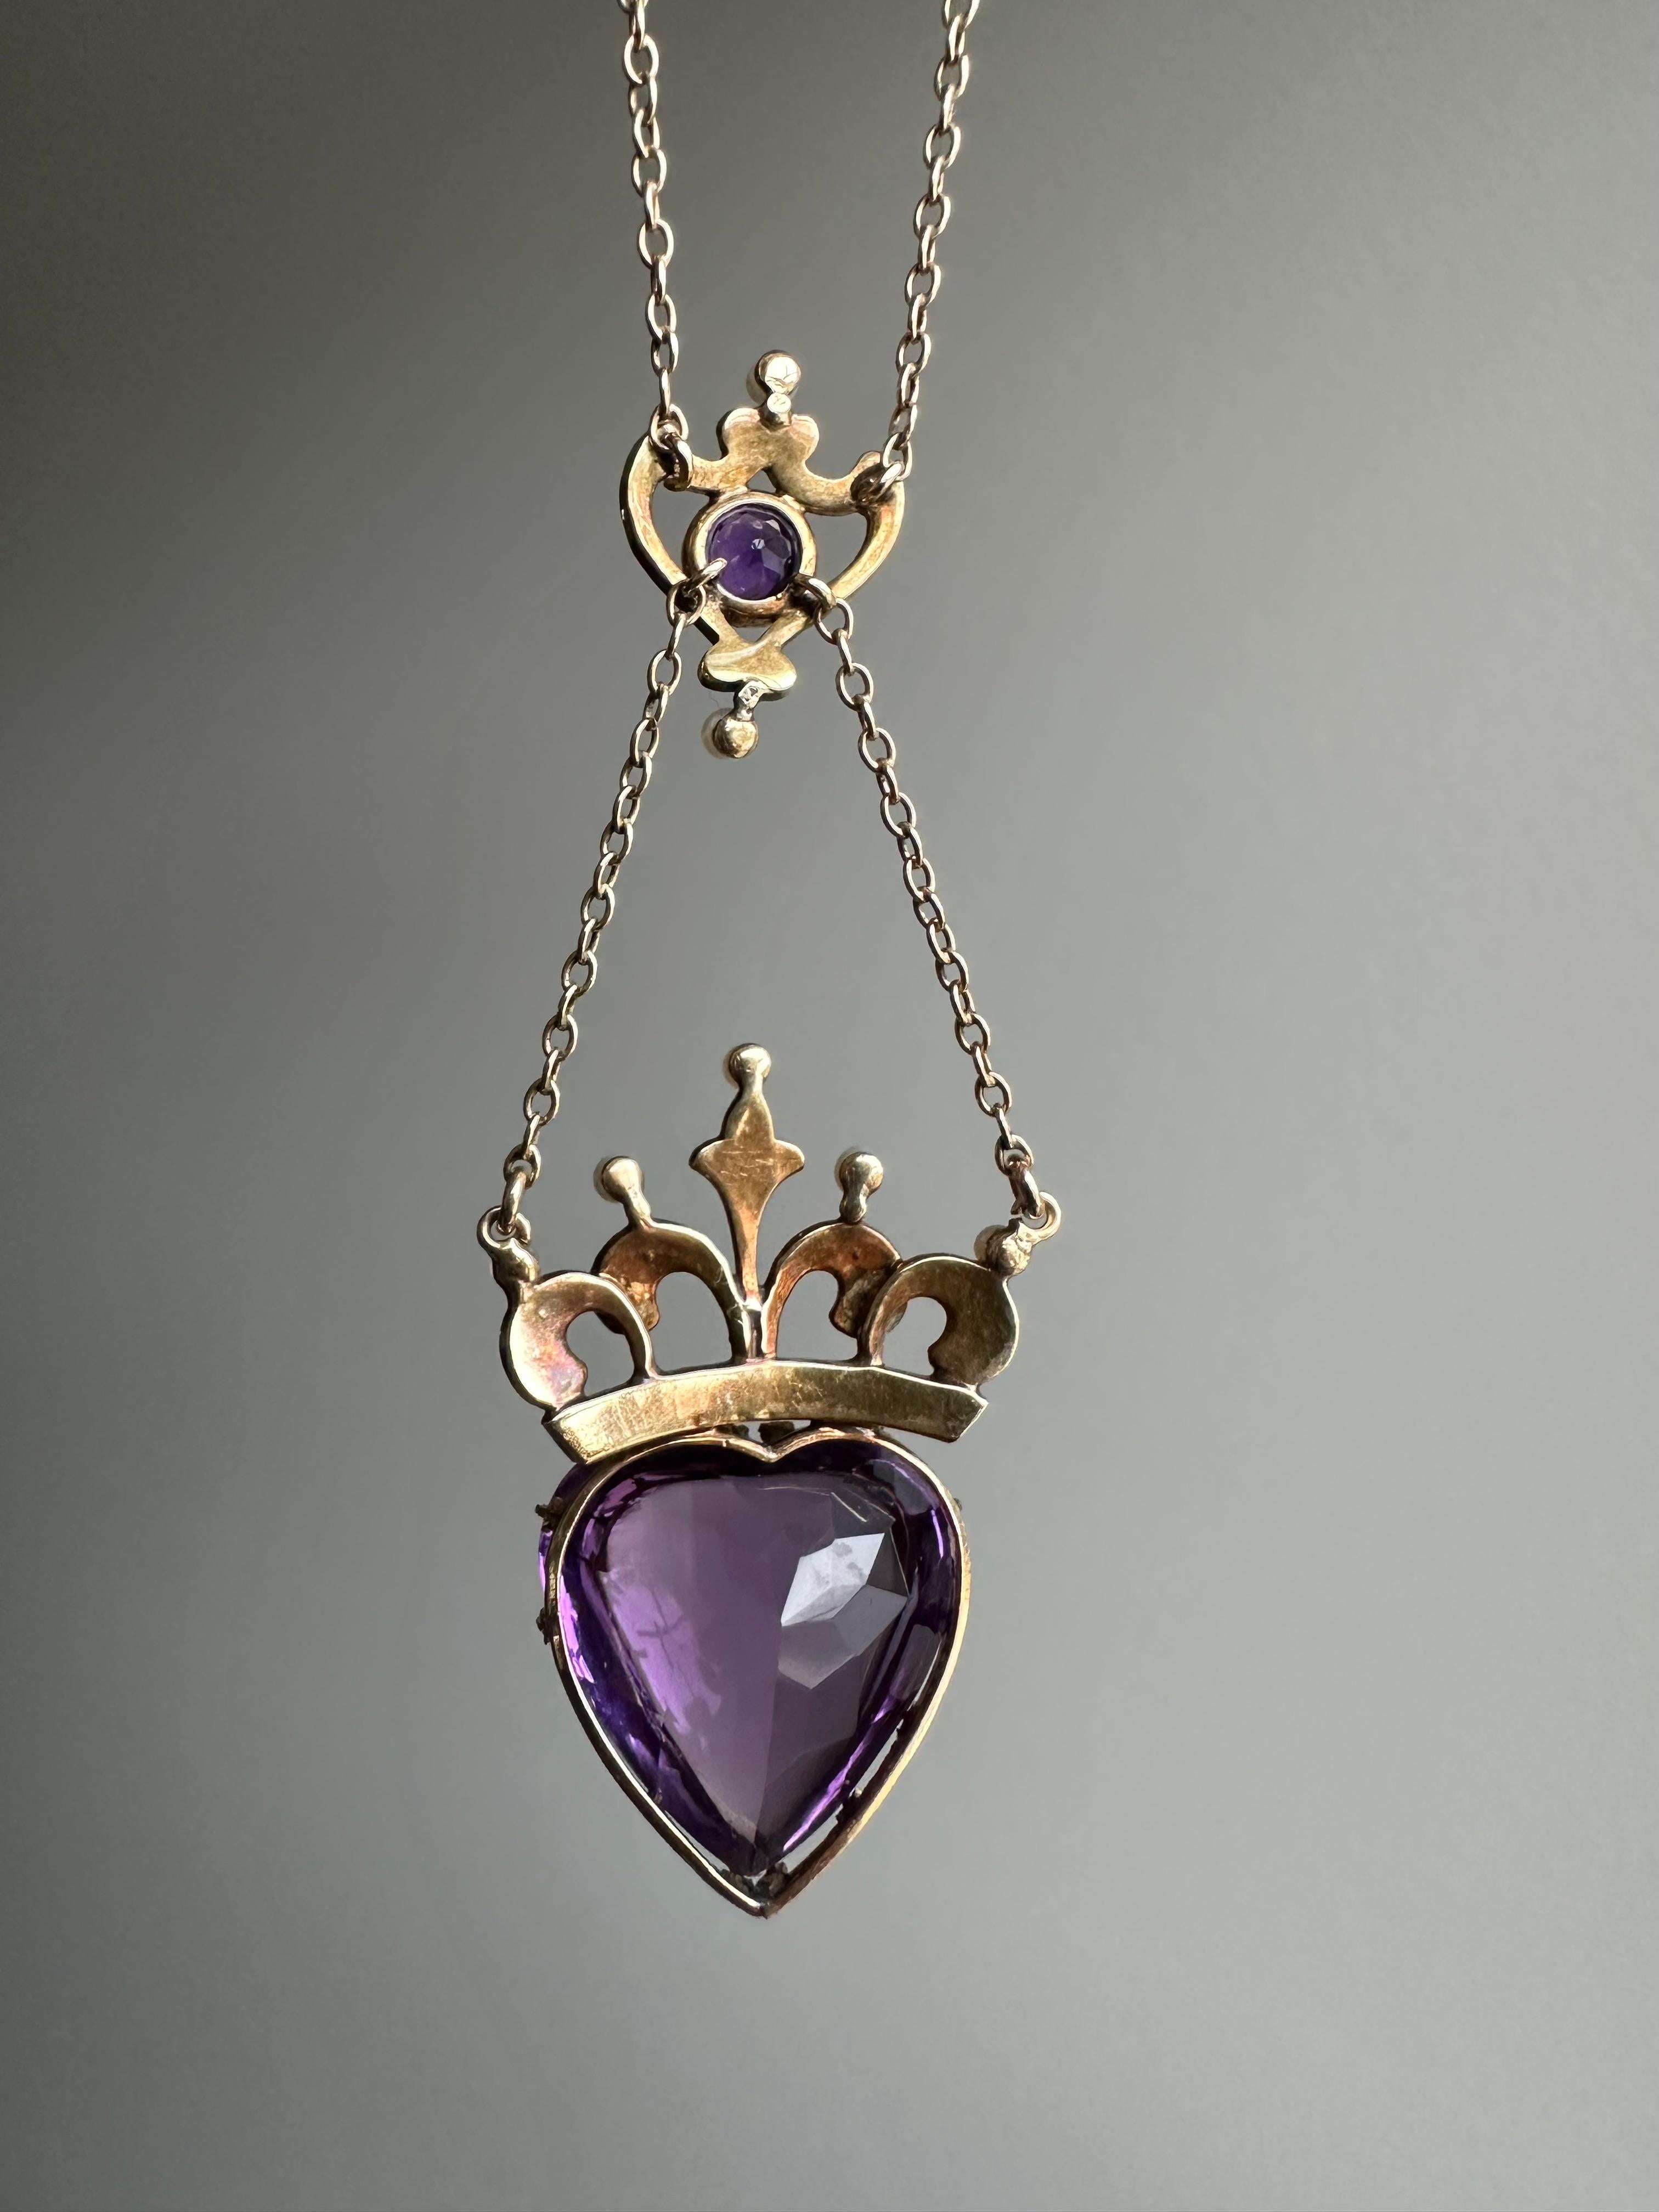 Dating to the turn of the 20th century, this enchanting crowned heart necklace displays a regal buff-top amethyst heart surmounted by a delicate golden crown embellished by lustrous seed pearls. The heart is gracefully suspended by a tiny urn